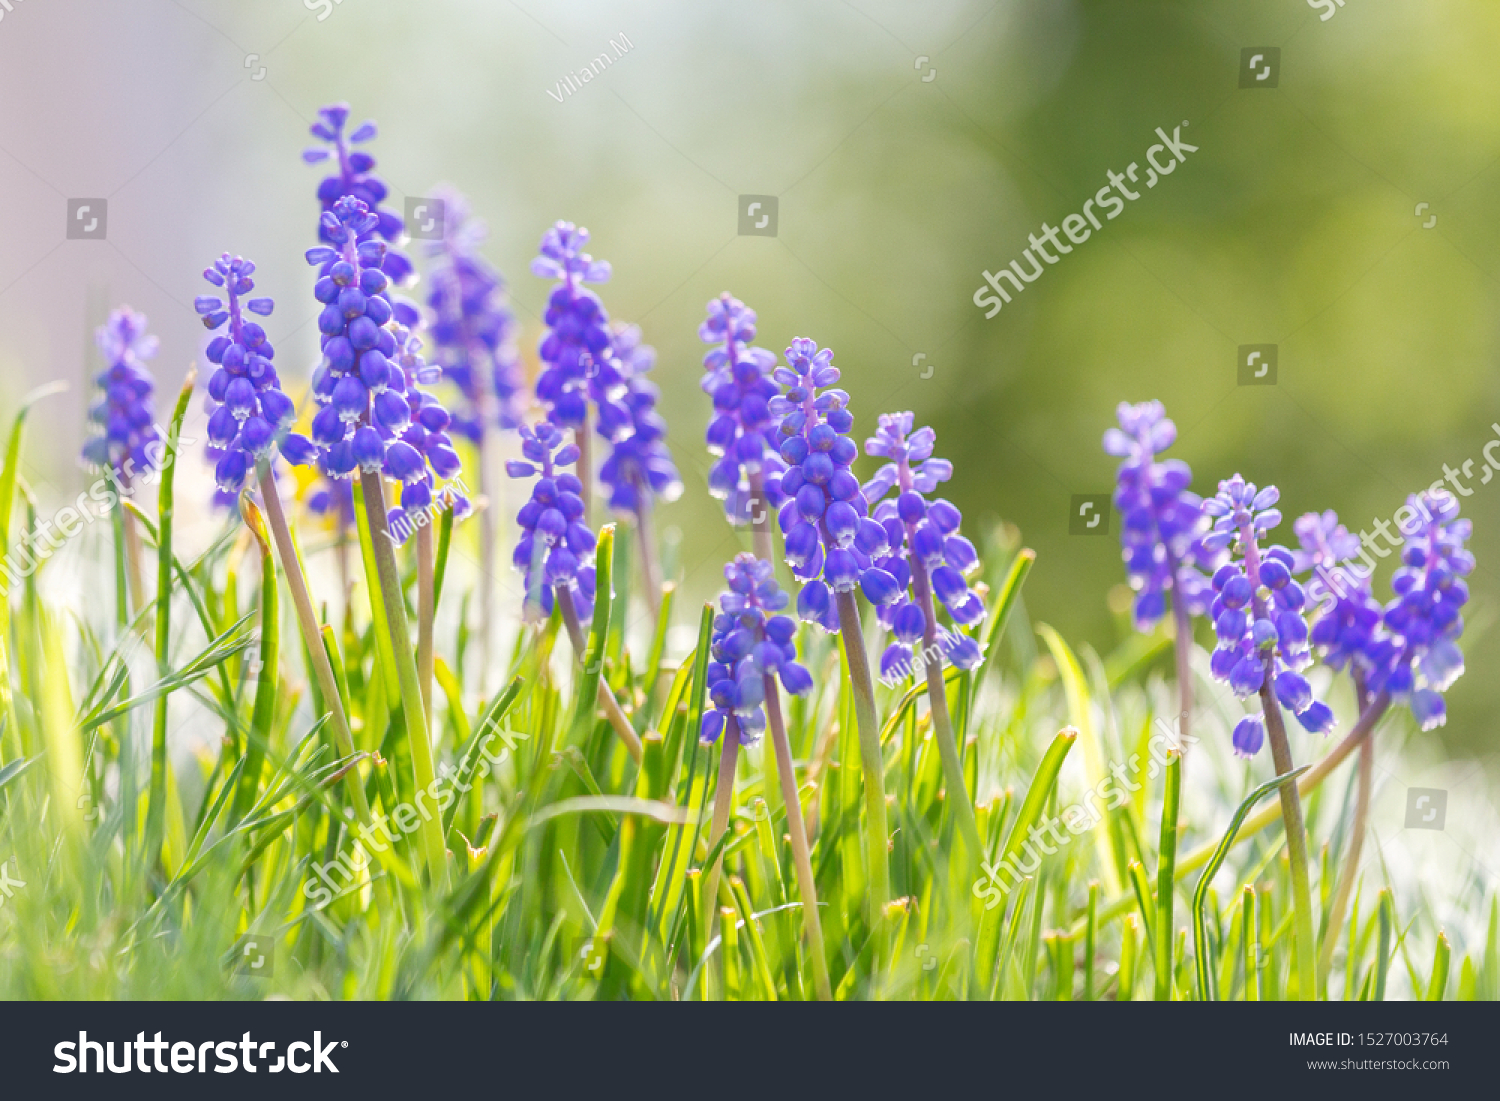 Muscari - grape hyacinth flower, group of flowers in meadow with blurred background in sunny day. #1527003764